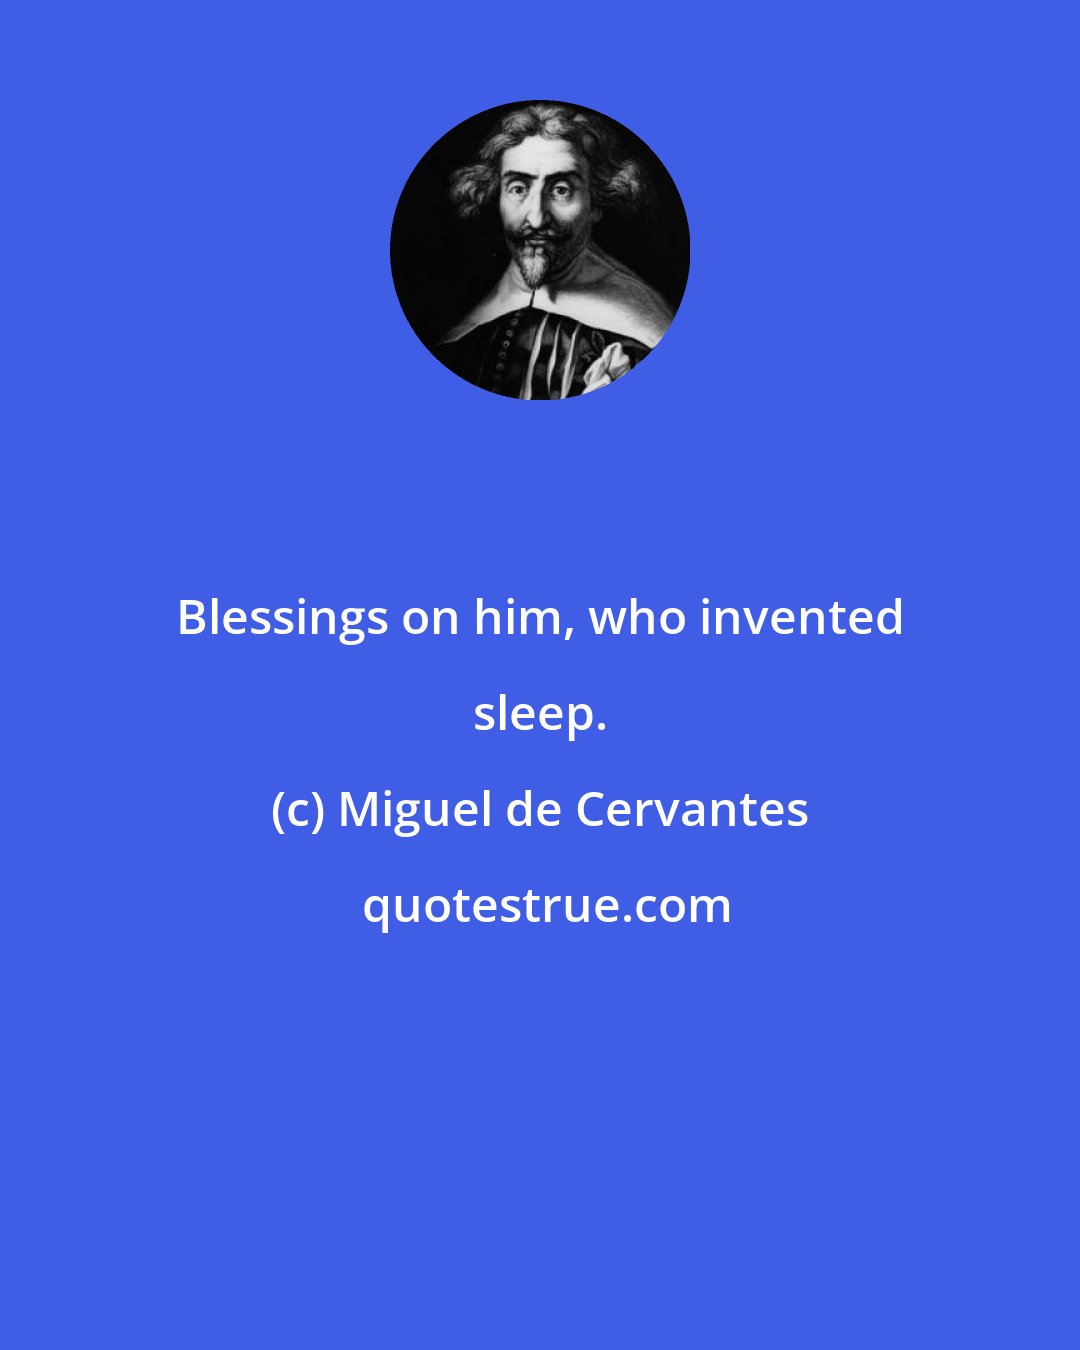 Miguel de Cervantes: Blessings on him, who invented sleep.